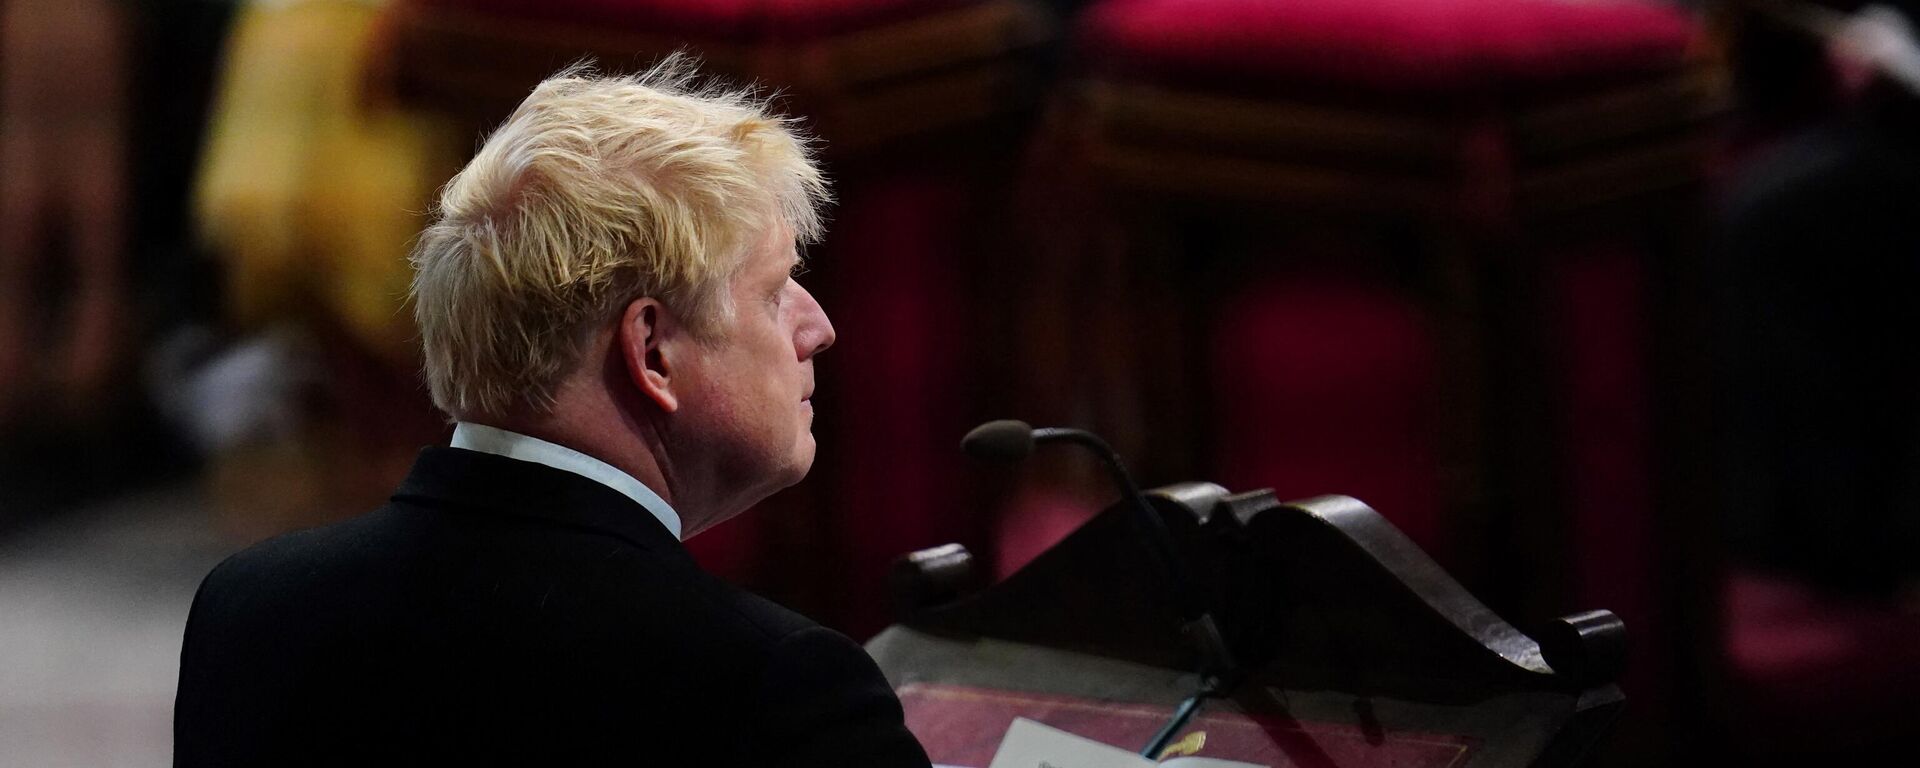 Britain's Prime Minister Boris Johnson speaks during the National Service of Thanksgiving for The Queen's reign at Saint Paul's Cathedral in London on June 3, 2022 as part of Queen Elizabeth II's platinum jubilee celebrations. - Sputnik International, 1920, 26.06.2022